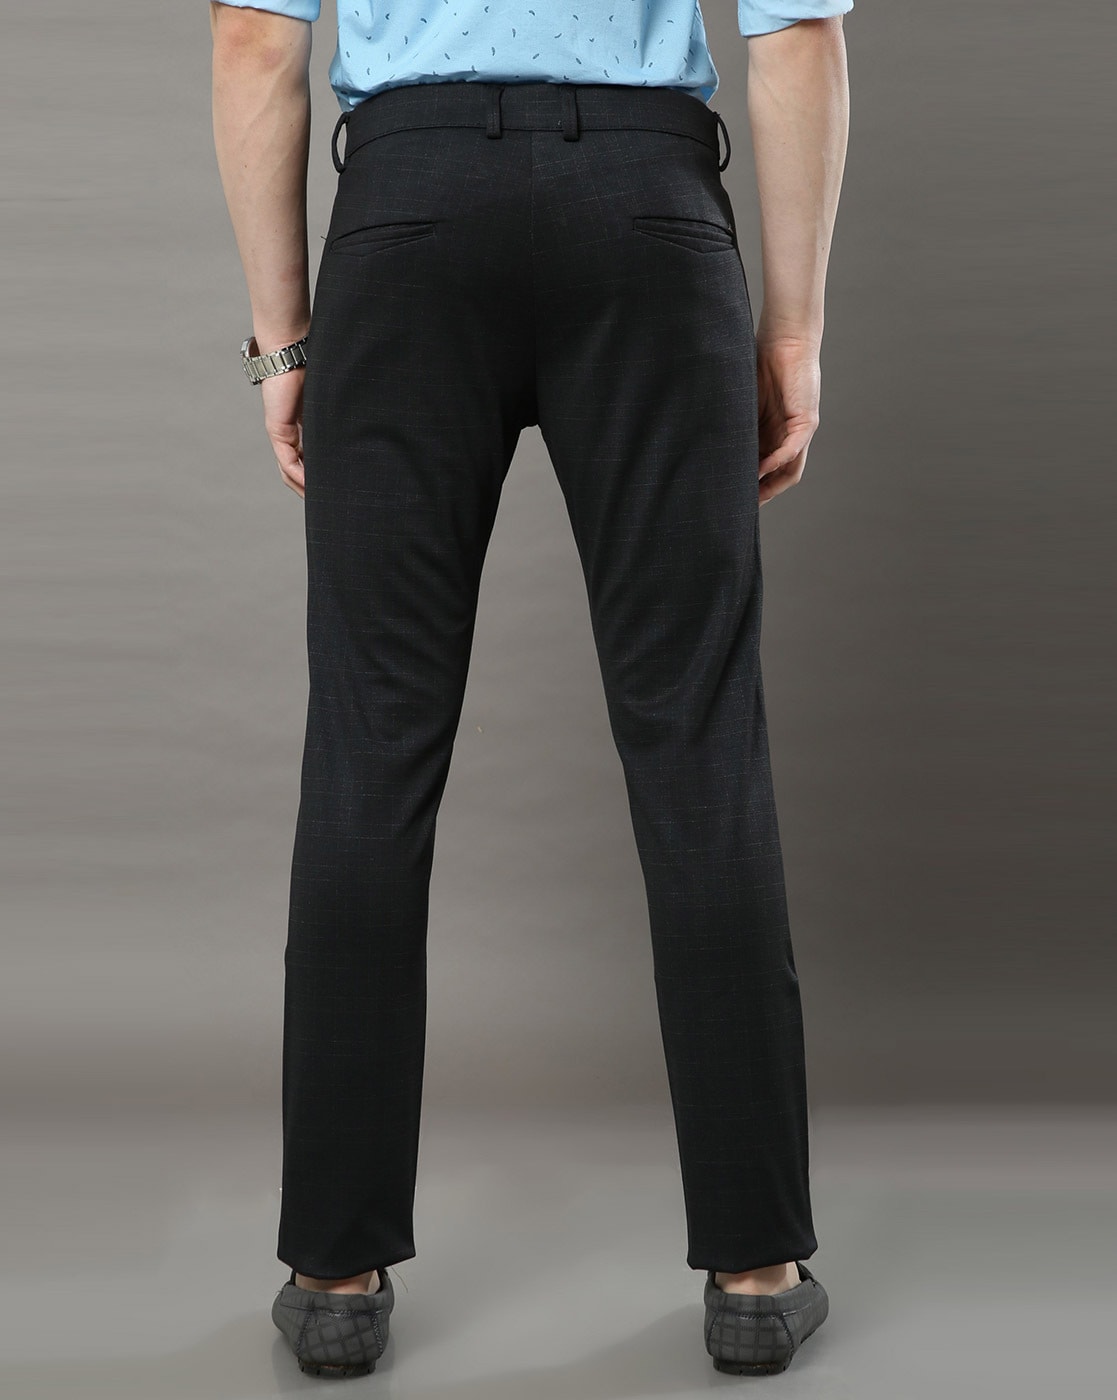 Slim Fit Comfortable And Breathable Black Casual Wear Cotton Men's Pants  Light Source: Electricity at Best Price in Mumbai | Bagkar Bandhu